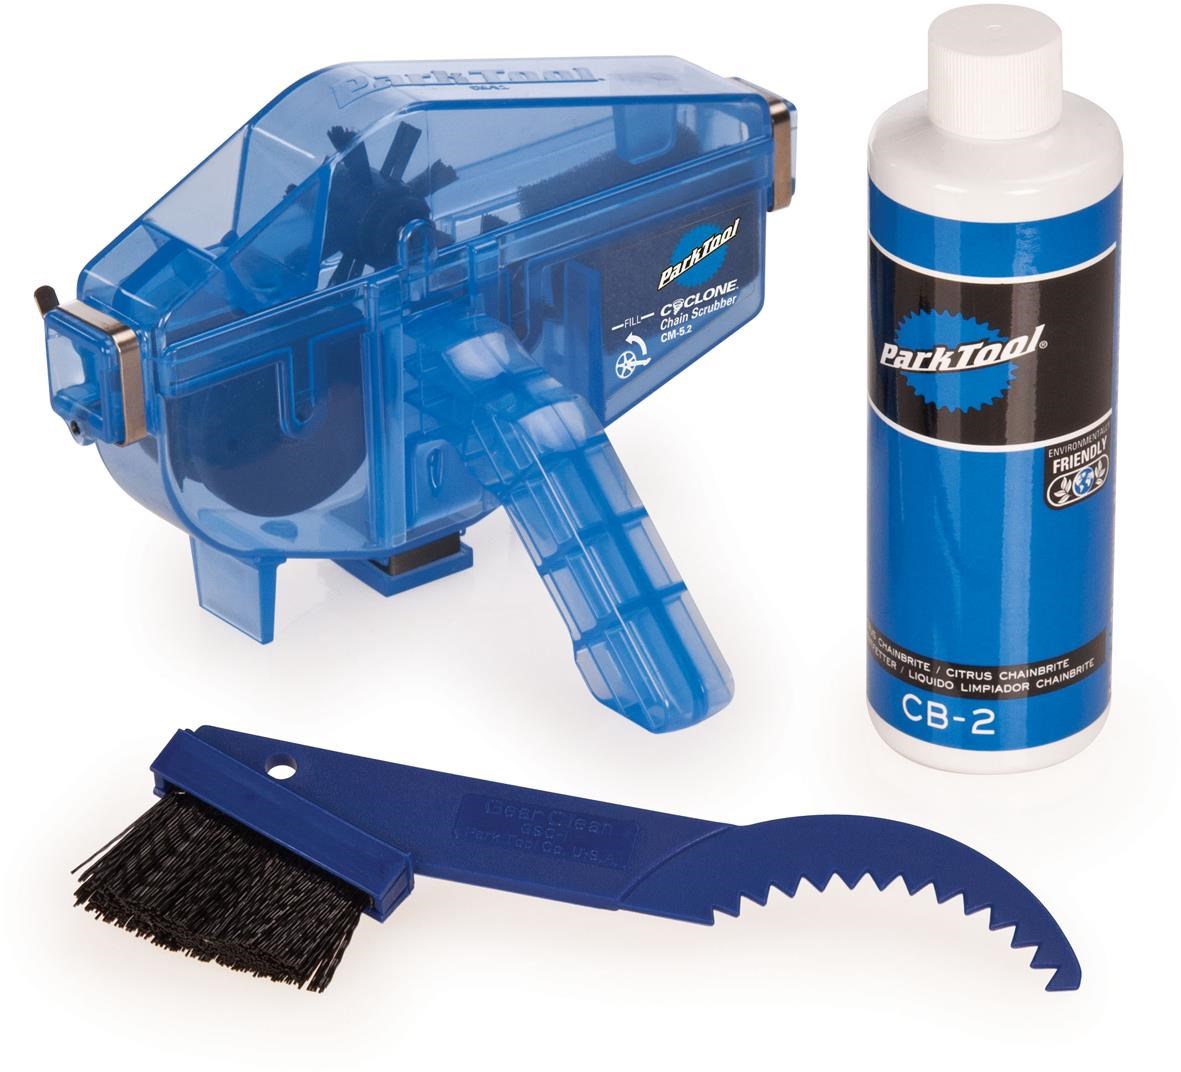 Park Tool CG2.3 ChainGang Cleaning System